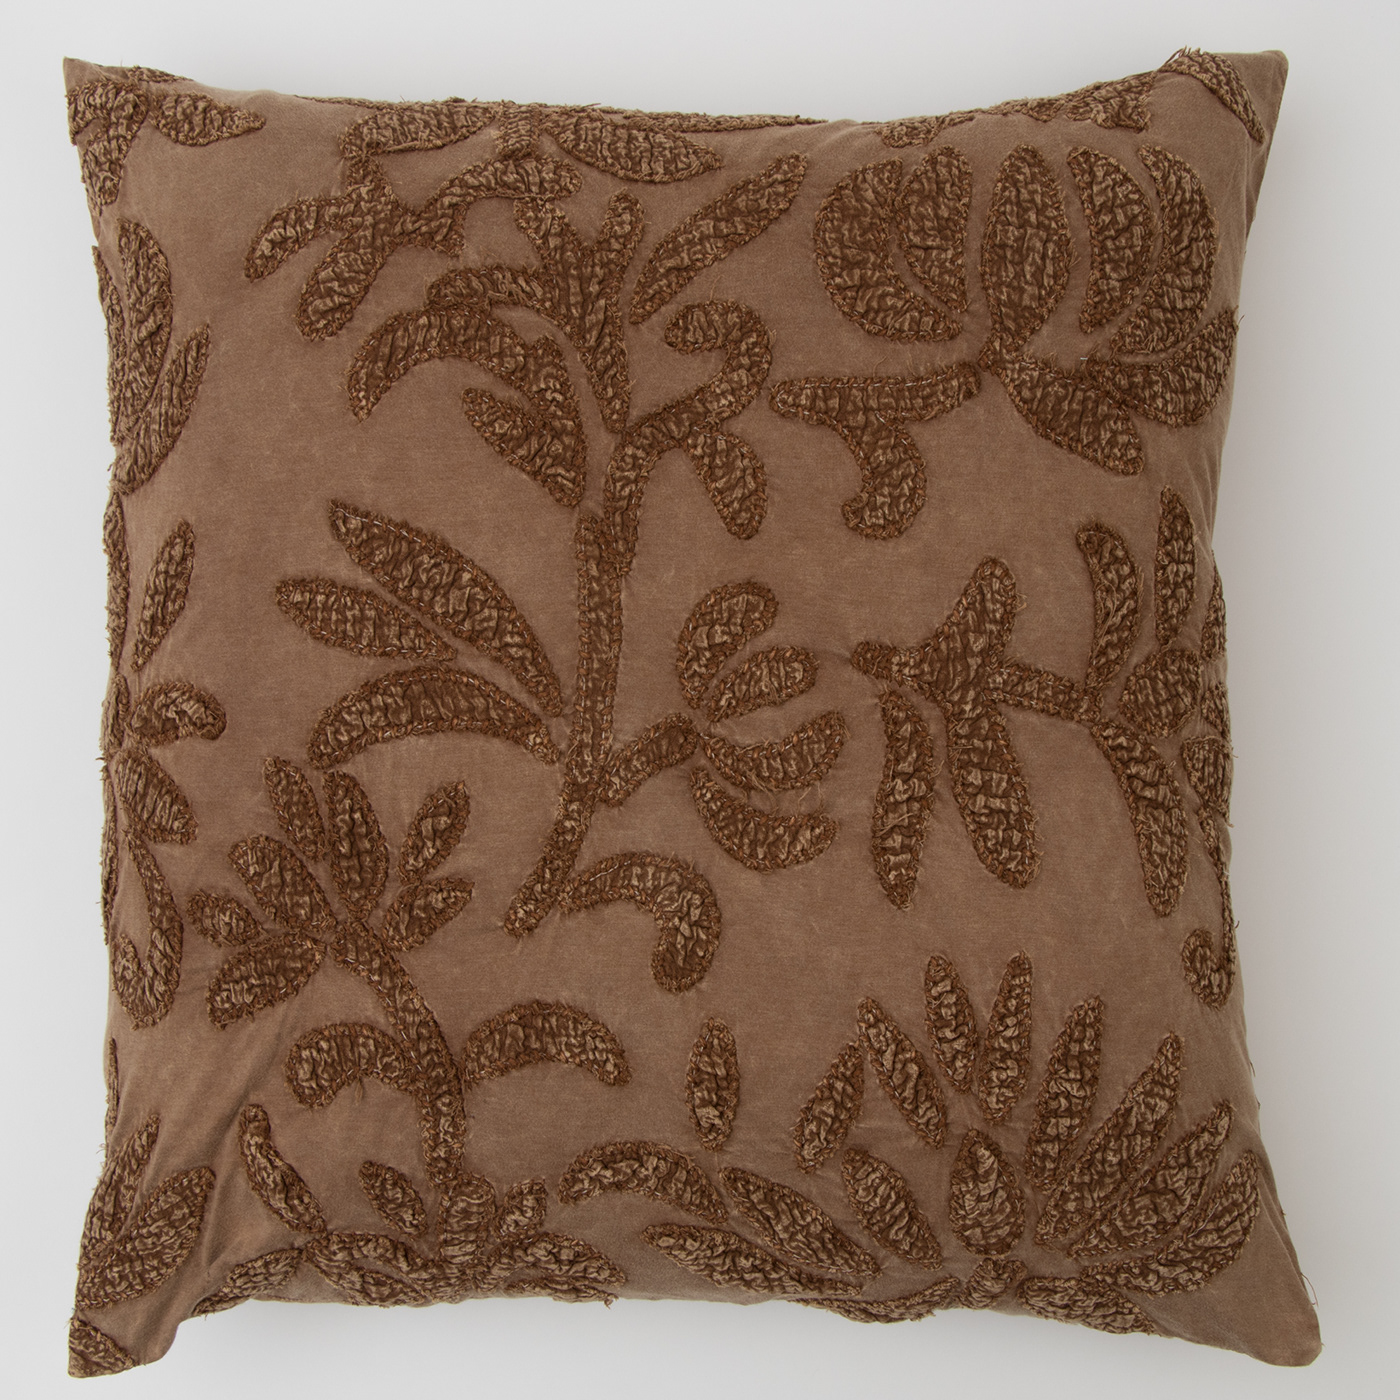 bedding decorative pillows embellishments embroidered pillows fall21 fallcollection grey leaves homedecor mapple leaves textures